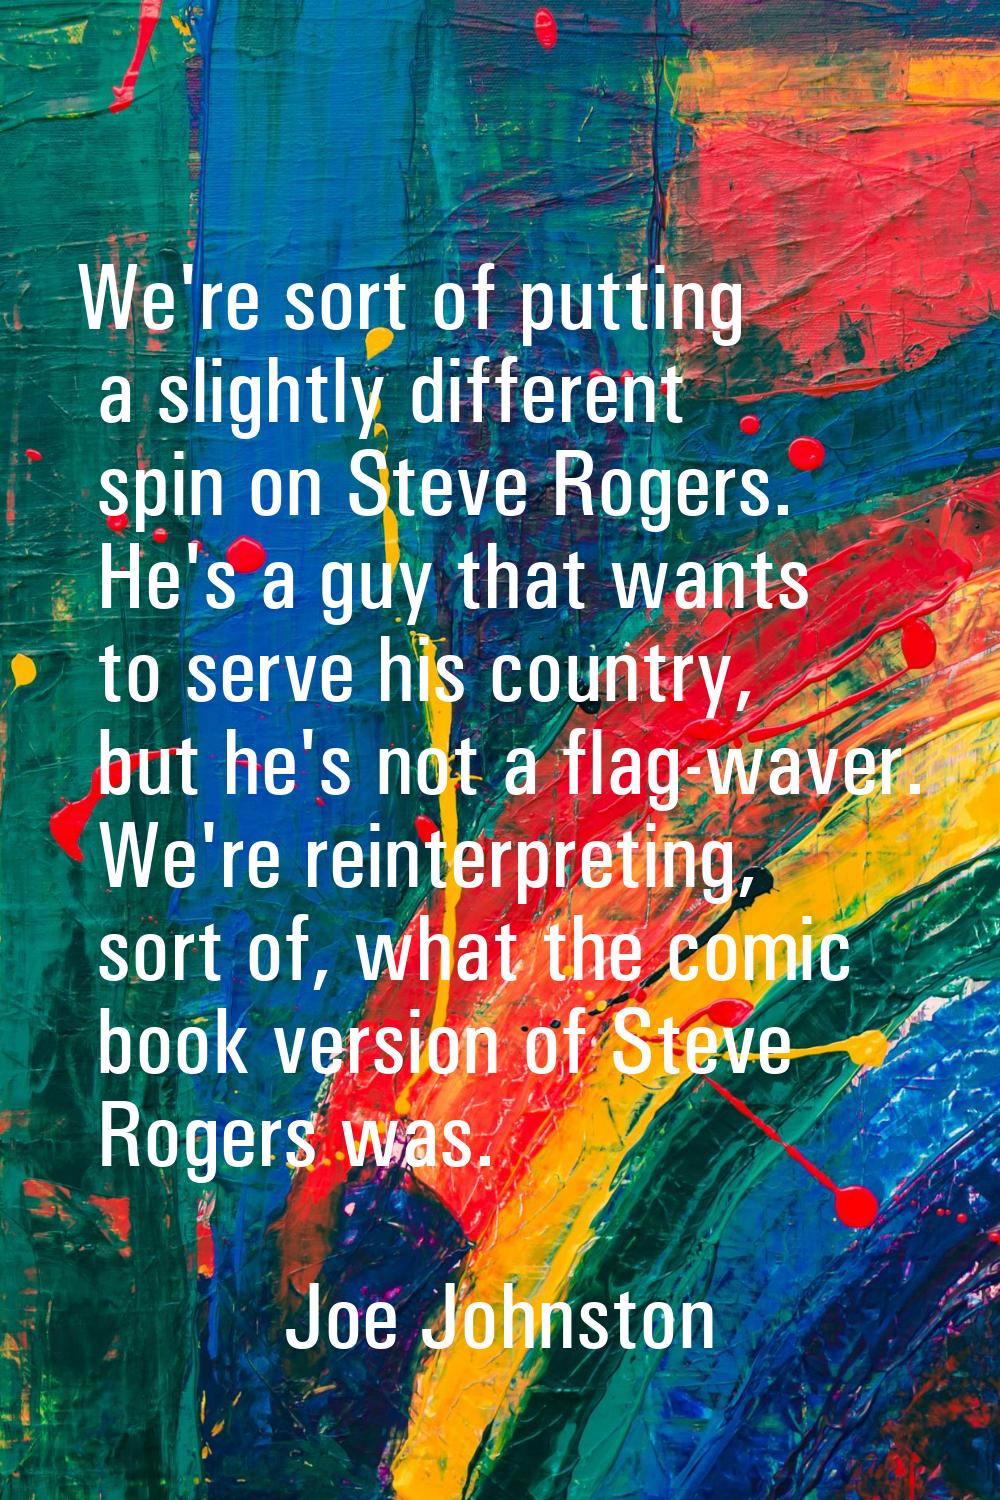 We're sort of putting a slightly different spin on Steve Rogers. He's a guy that wants to serve his